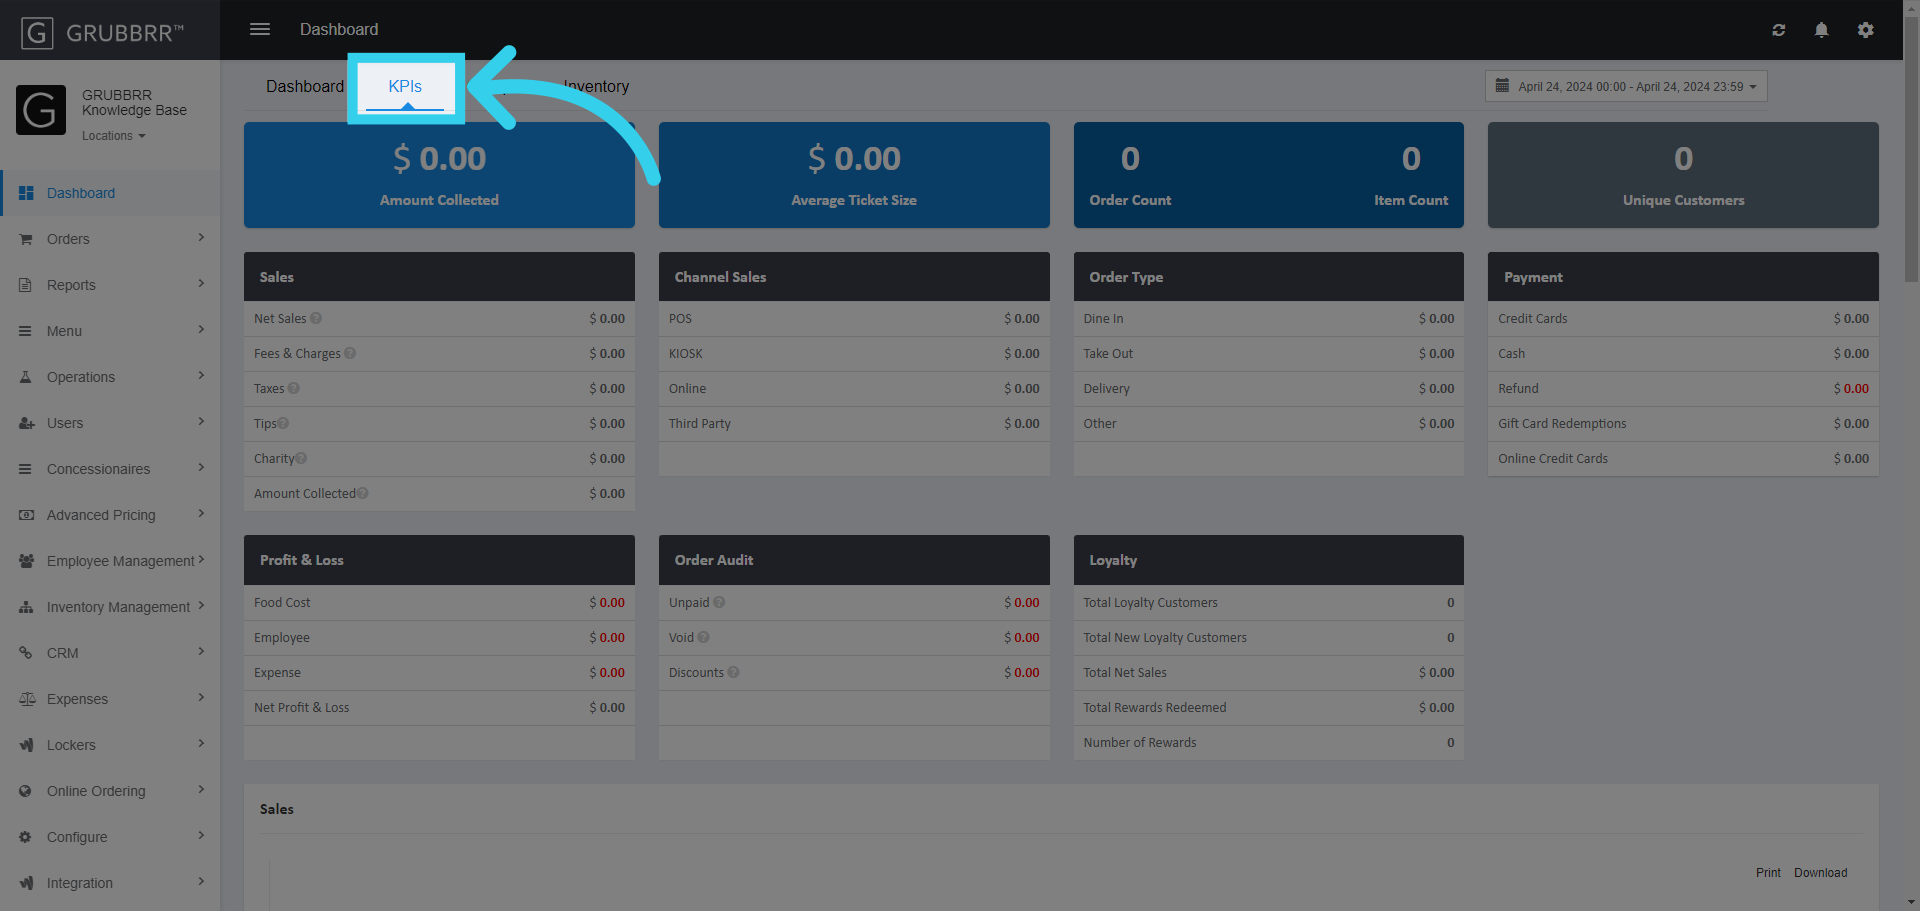 Access more detailed KPI reports by clicking the 'KPI' tab at the top of the page